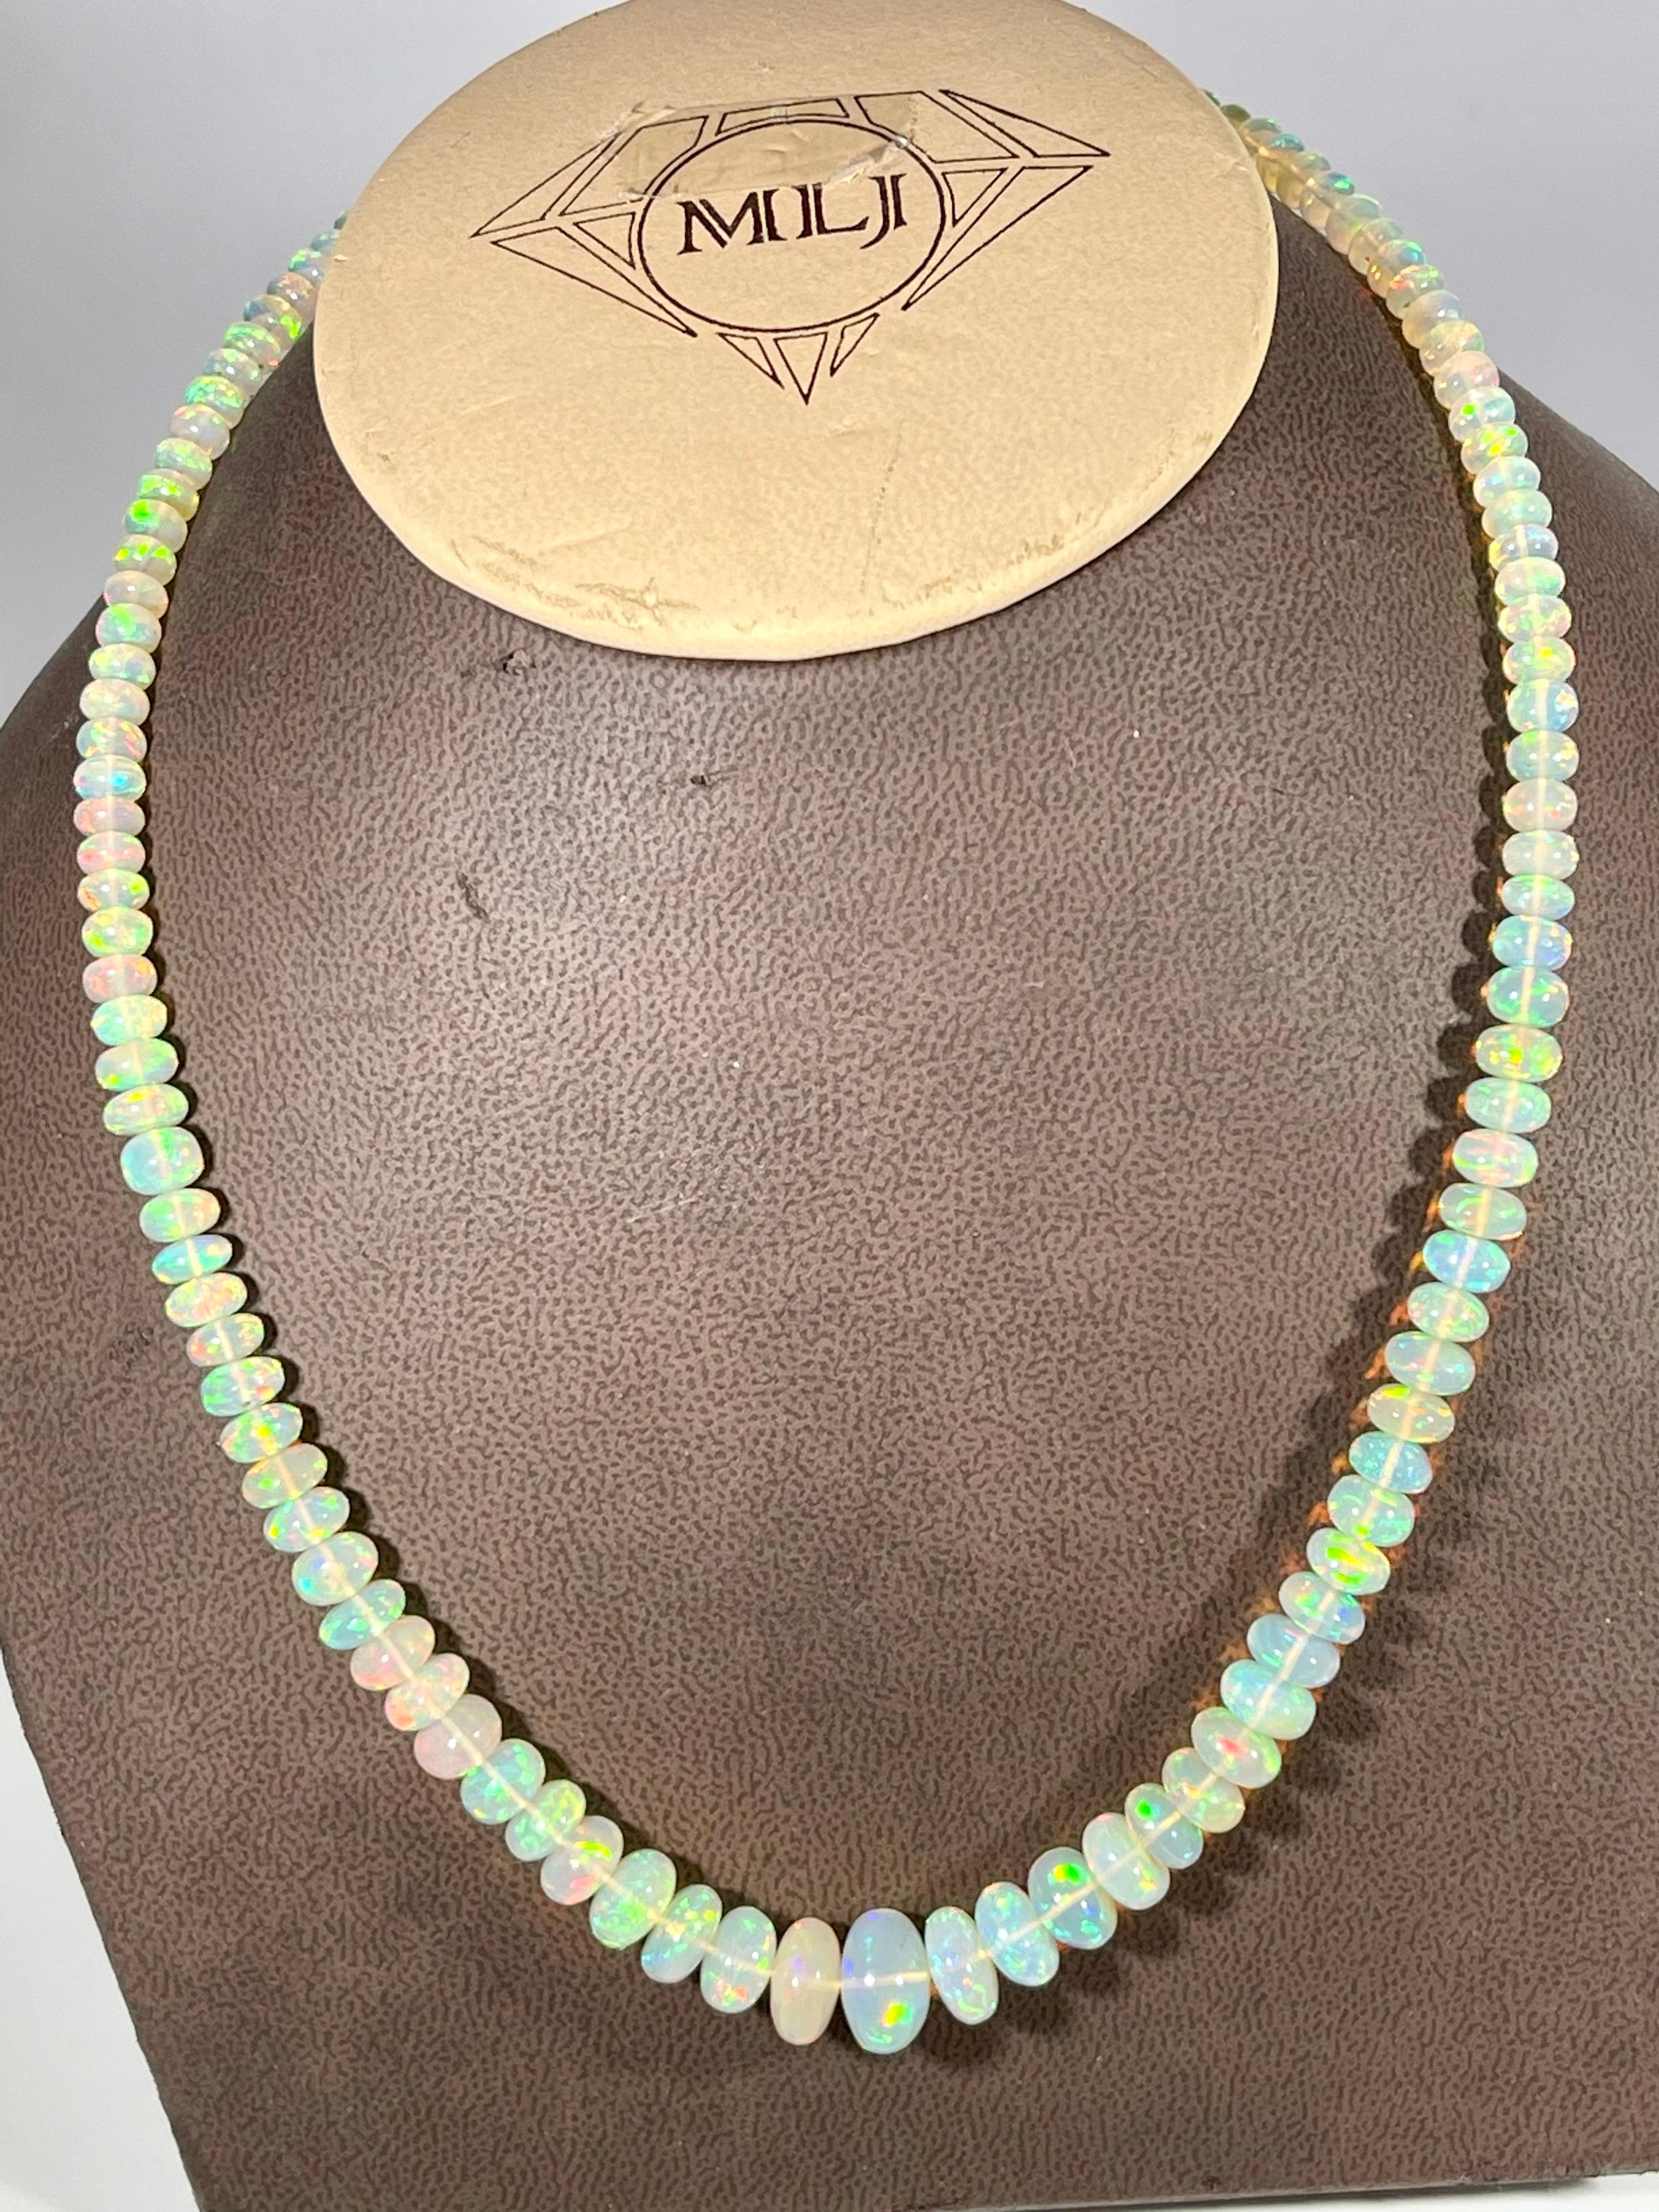  Natural Opal single strand Bead Necklace with 14 Karat lobster gold Clasp. These are Ethiopian Beads
20 to 21 inch long 
1 layers of Natural opal  Beads
These are Smooth beads , have  very much  Luster and shine
Beautiful color reflection of red ,